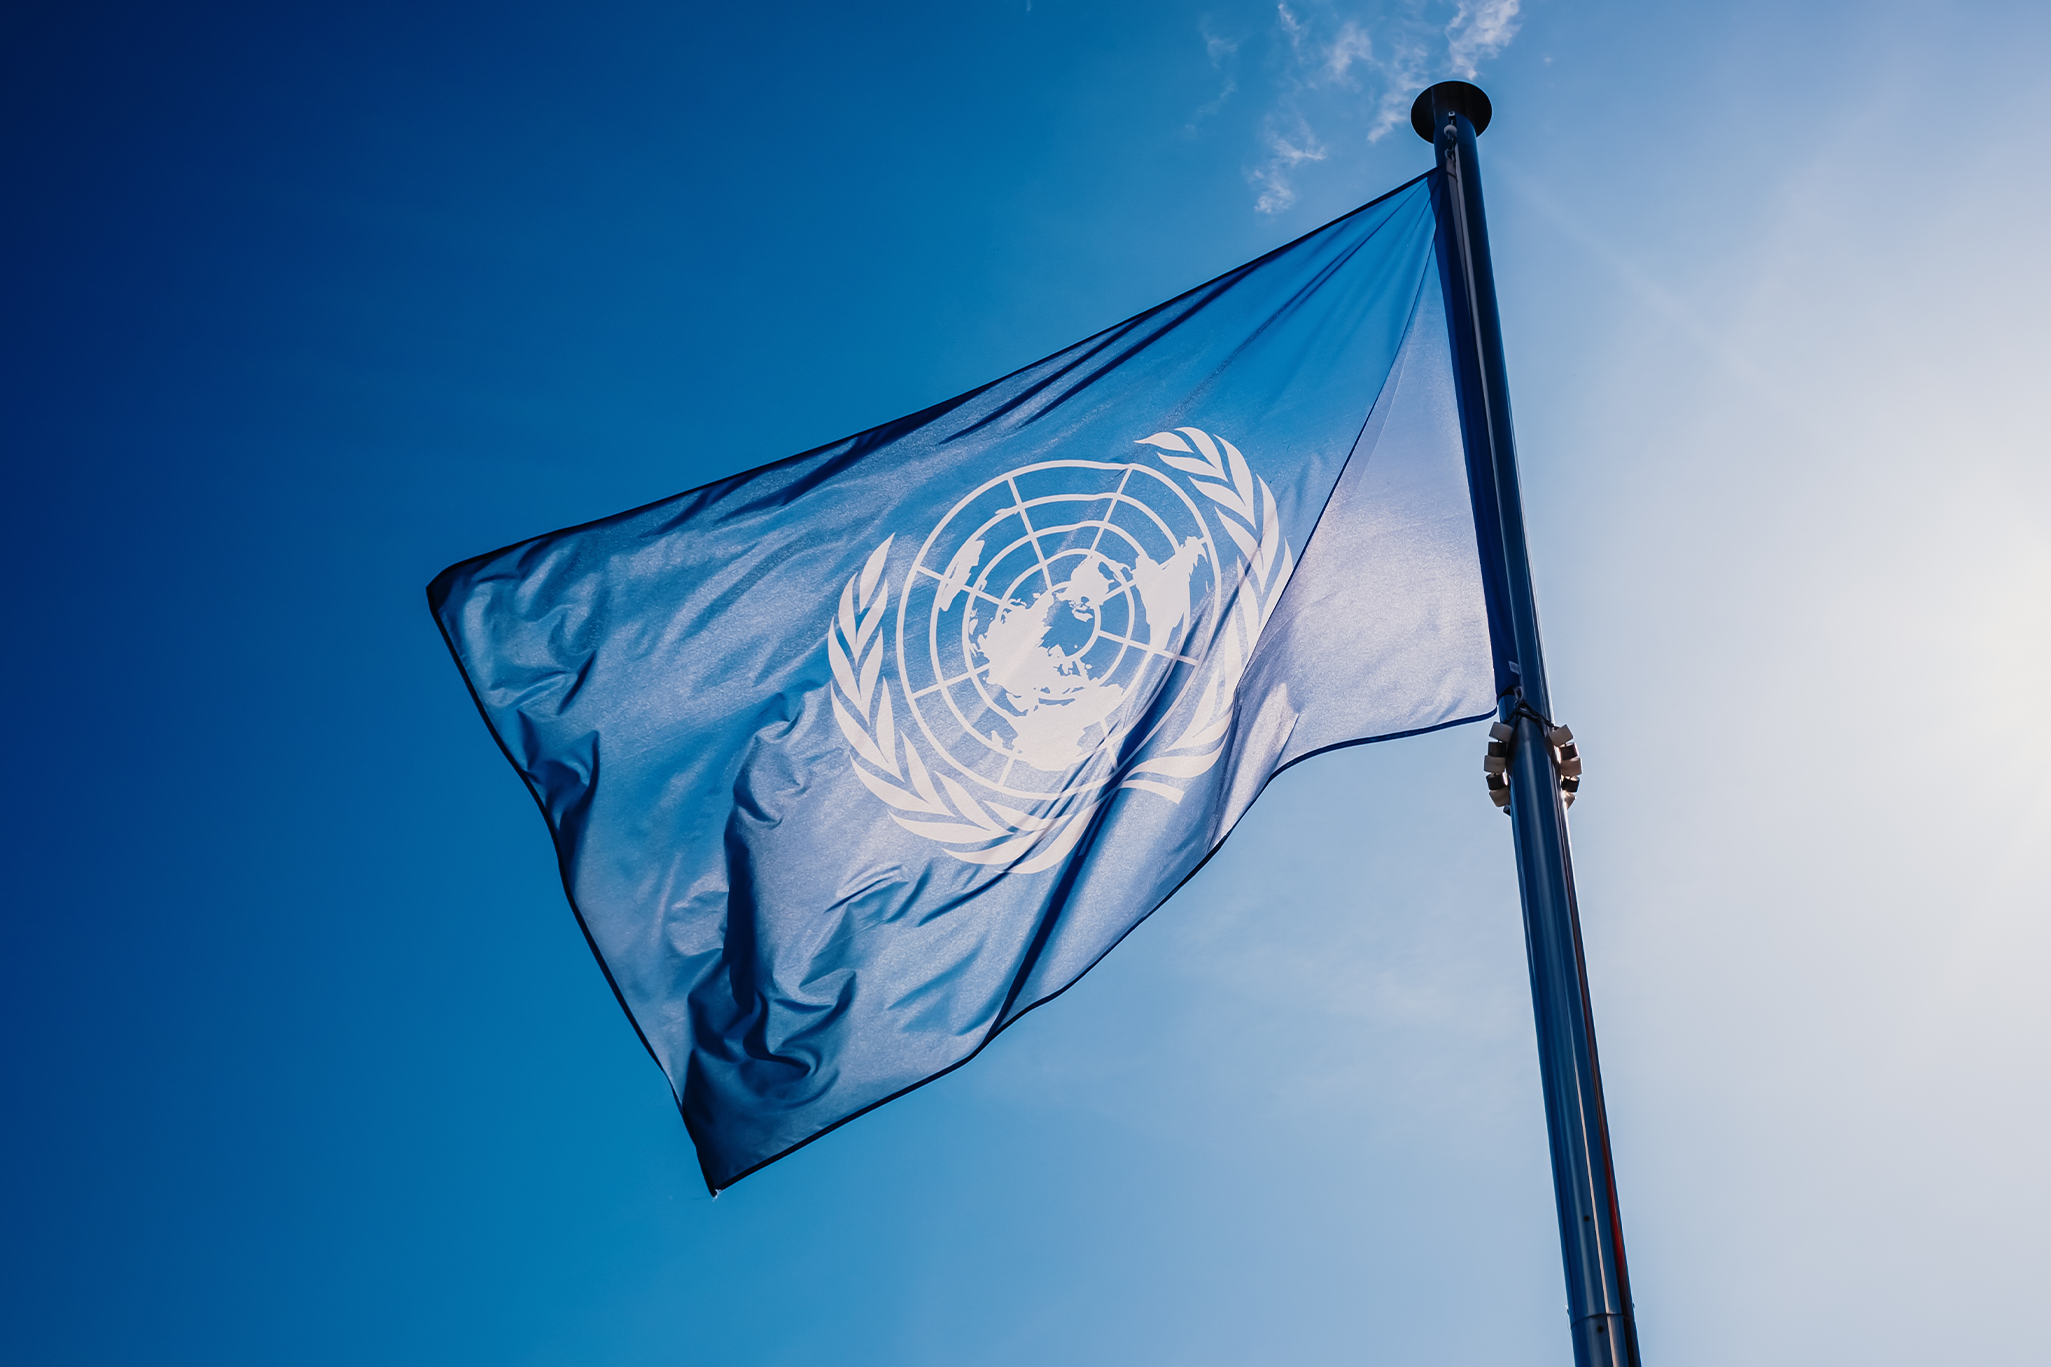 United Nations flag blowing in the wind